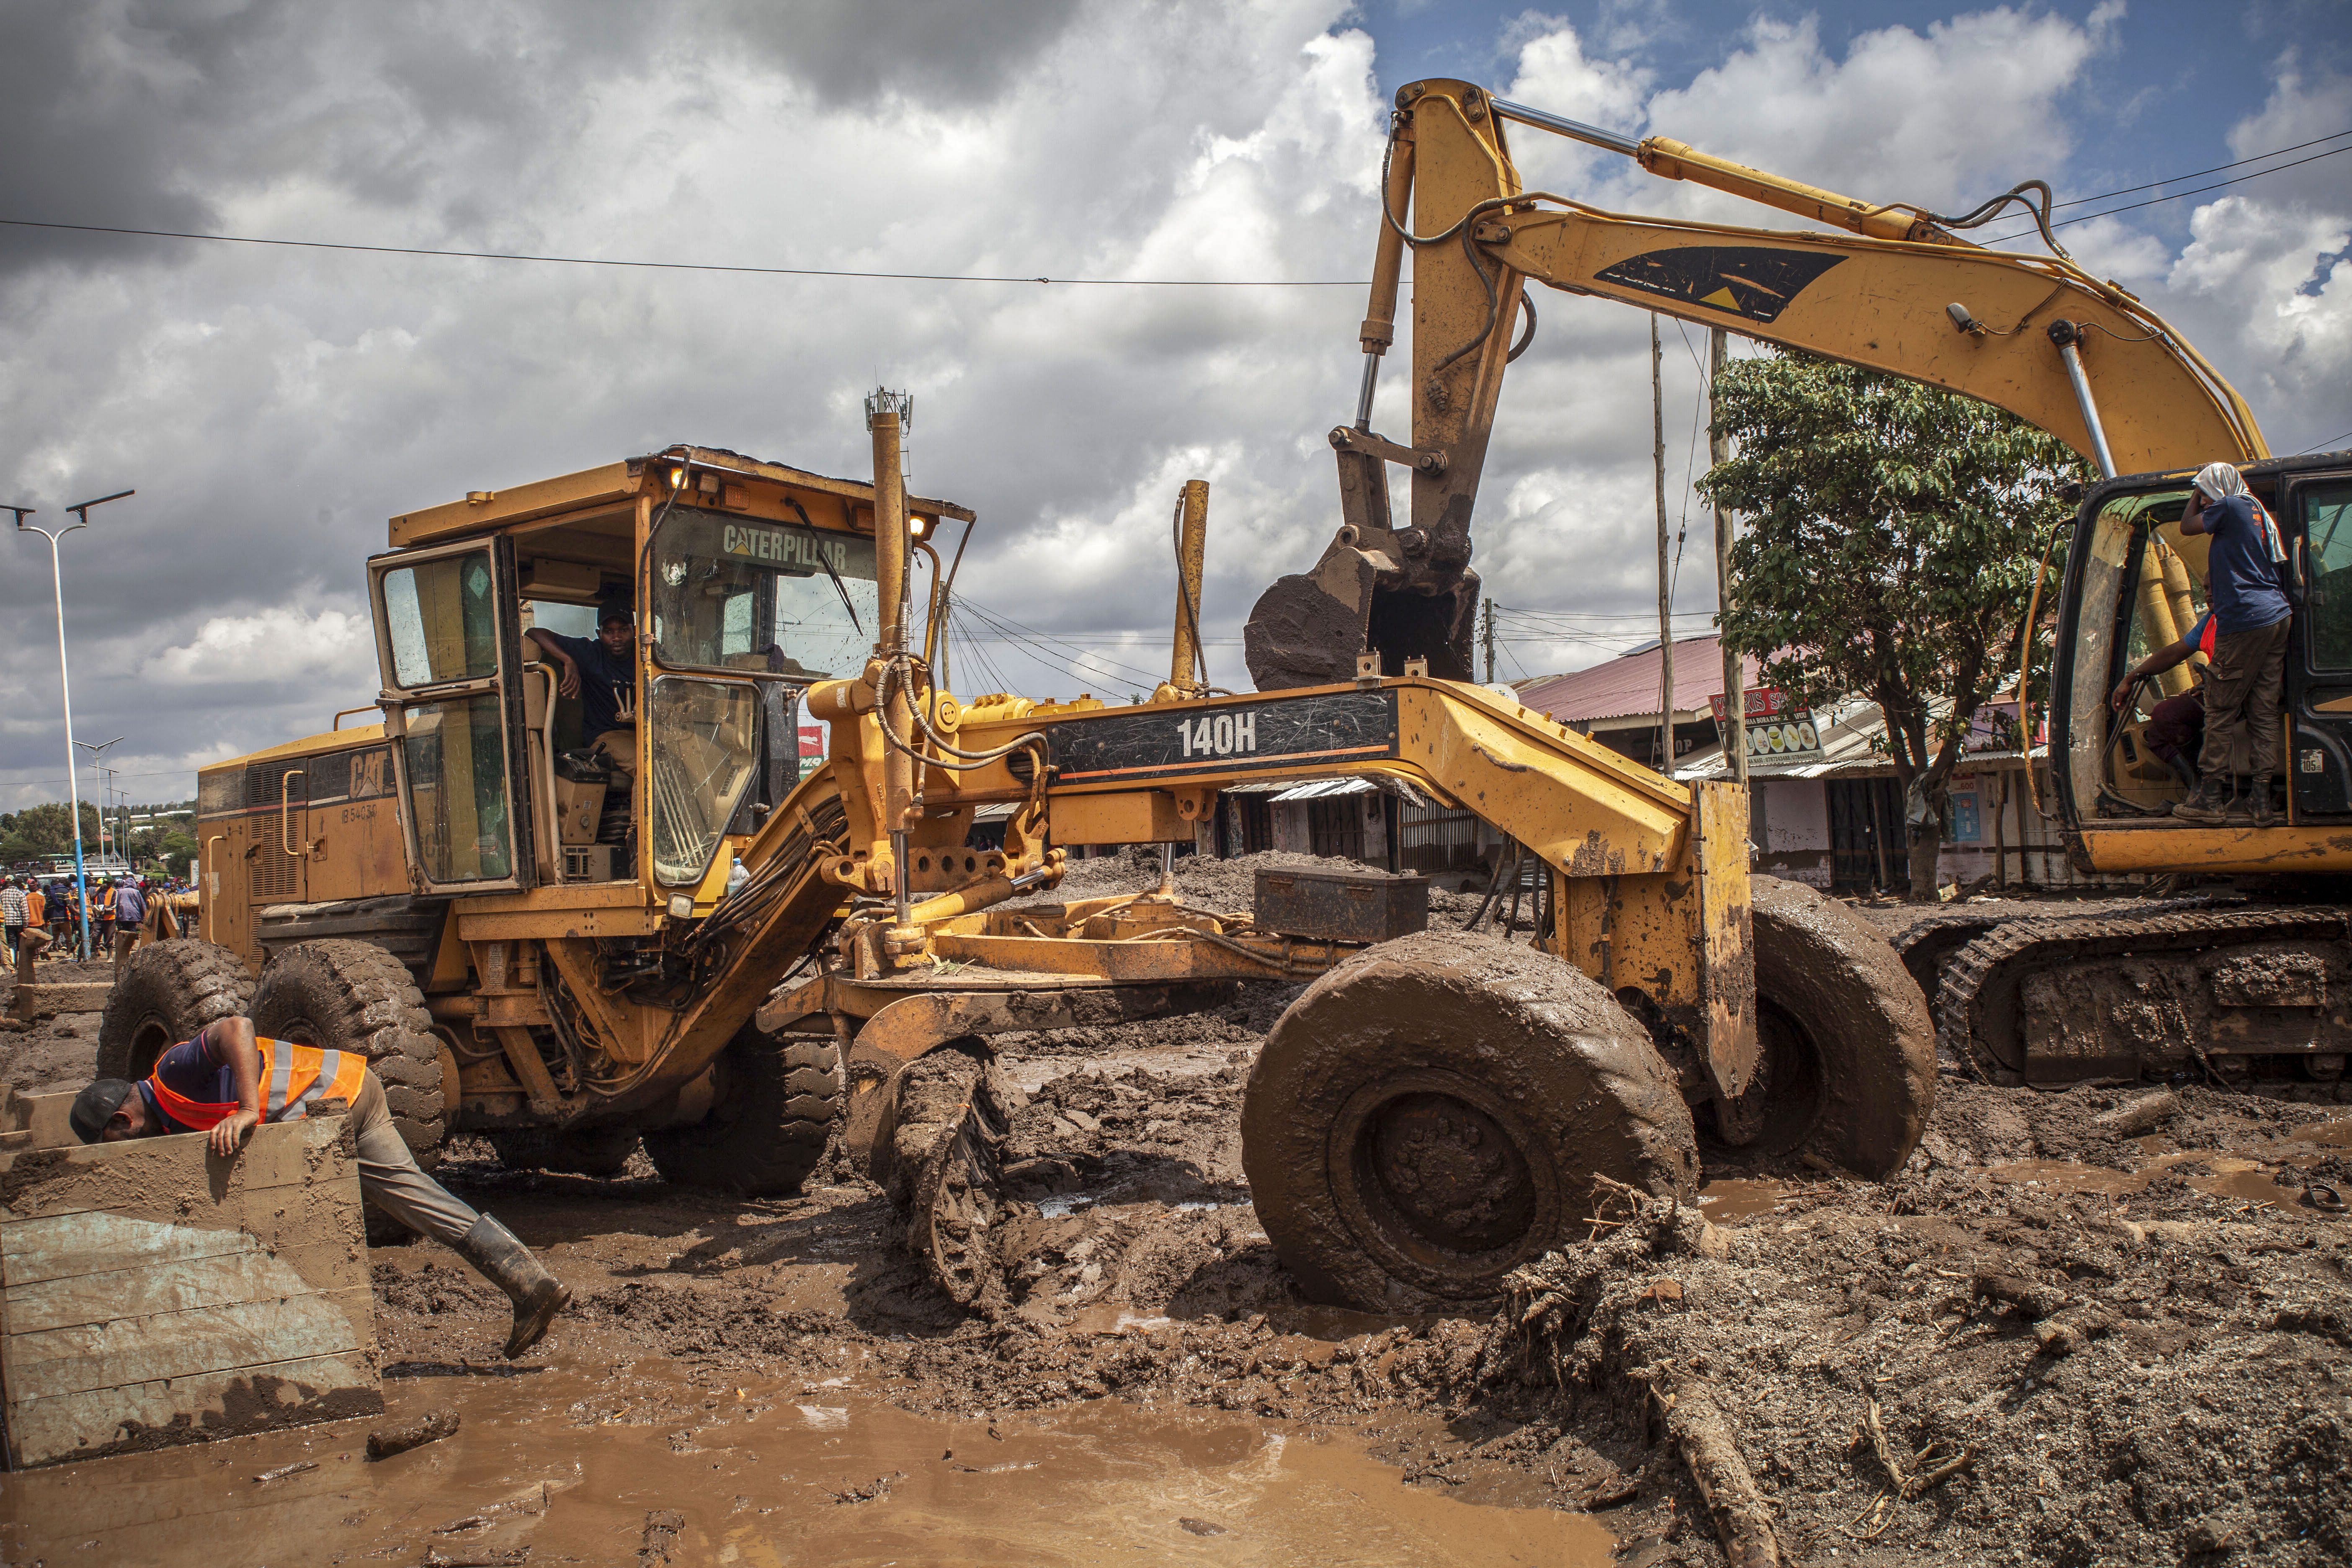 Workers remove mud from a street using excavators following landslides and flooding triggered by heavy rainfall in Katesh, Tanzania.